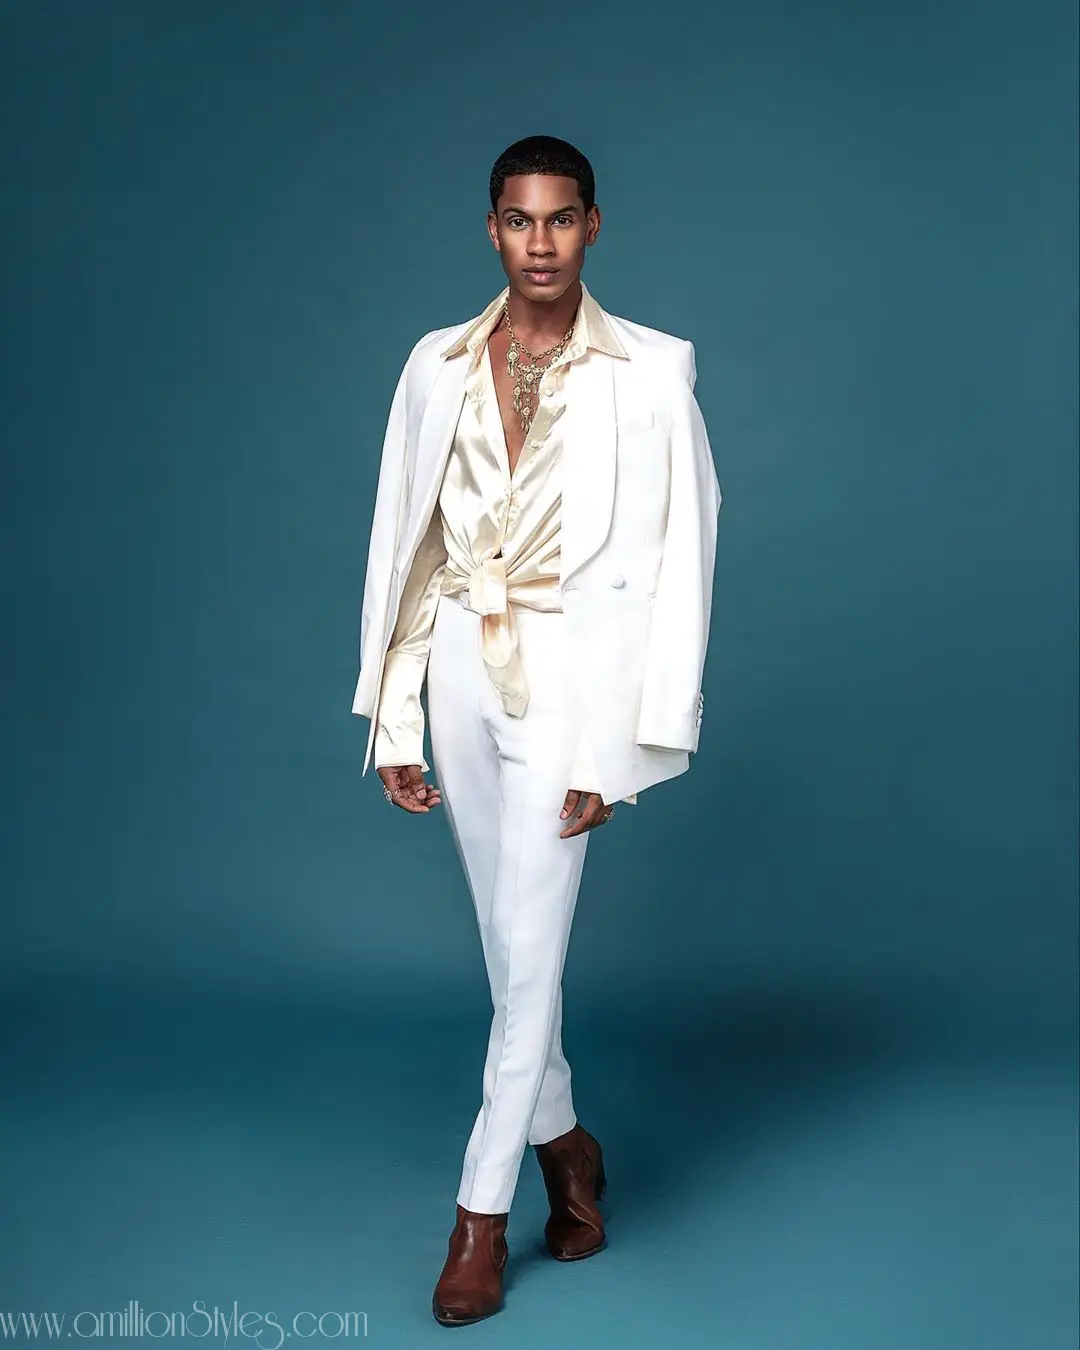 Denola Grey Is Stylish In Cream Silk Shirt And White Suit